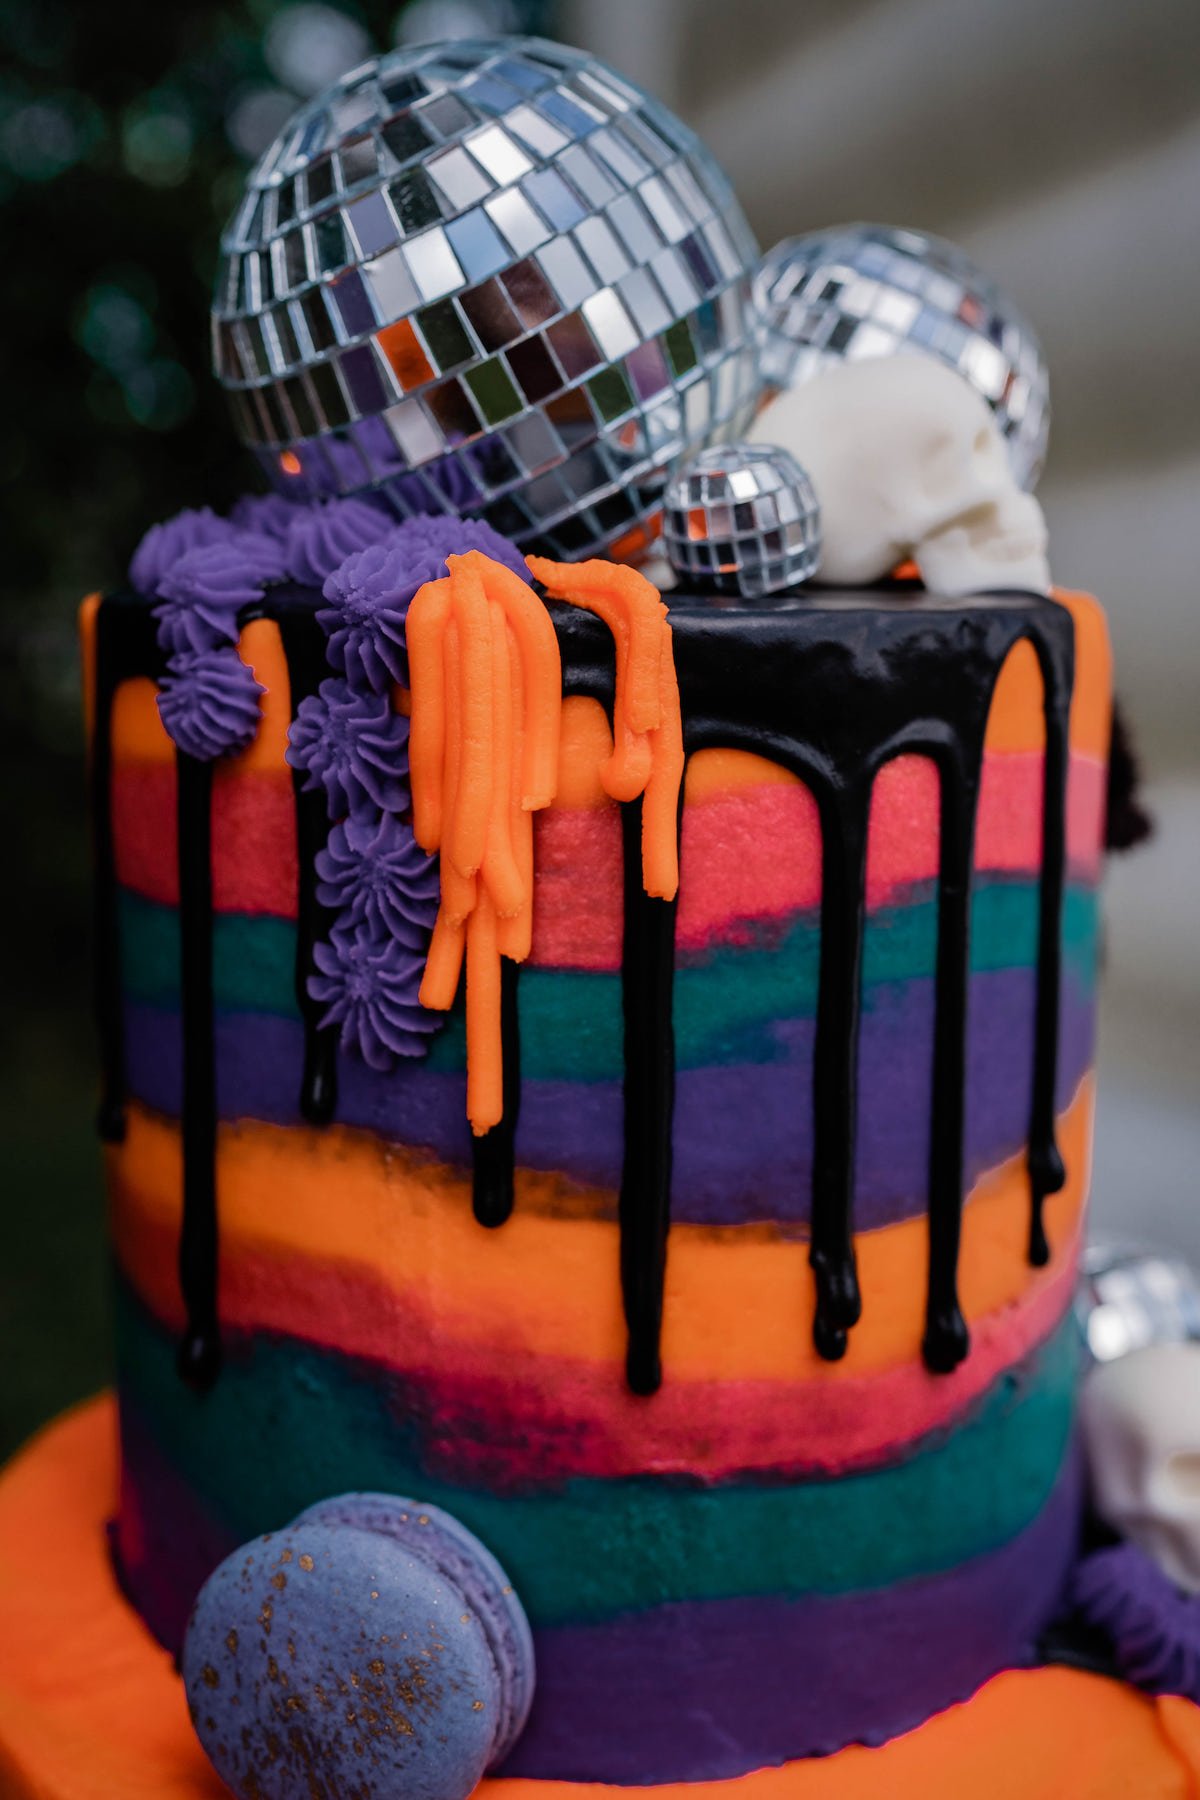 Drip cake with disco ball and skull cake topper